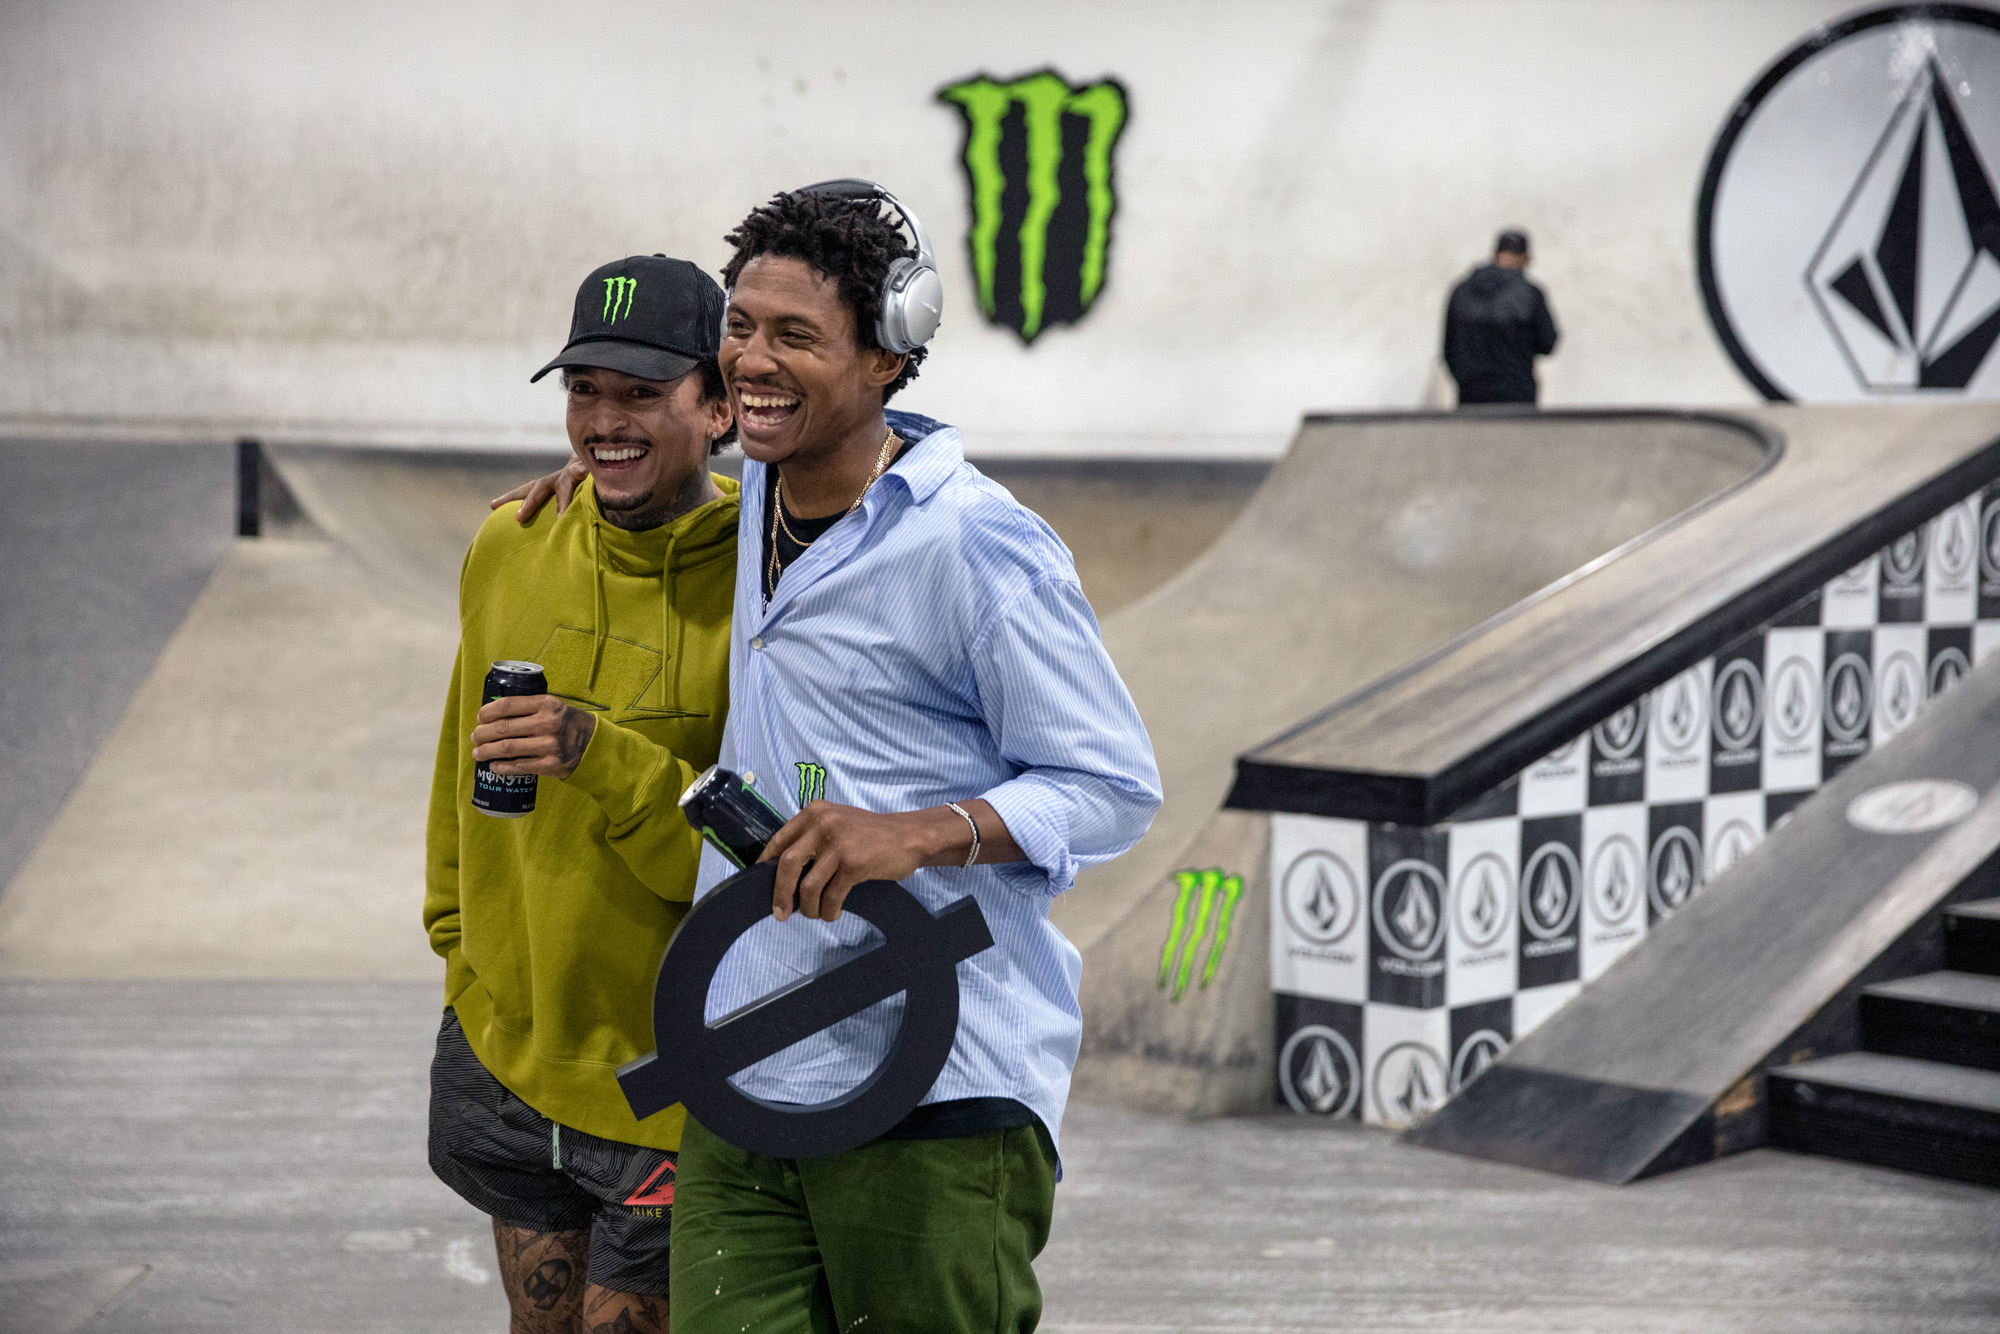 Monster Energy’s Nyjah Huston with Ishod Wair Who Took First Place in Street League Skateboarding “Unsanctioned 2” Pro Skateboarding Contest at Volcom Skatepark